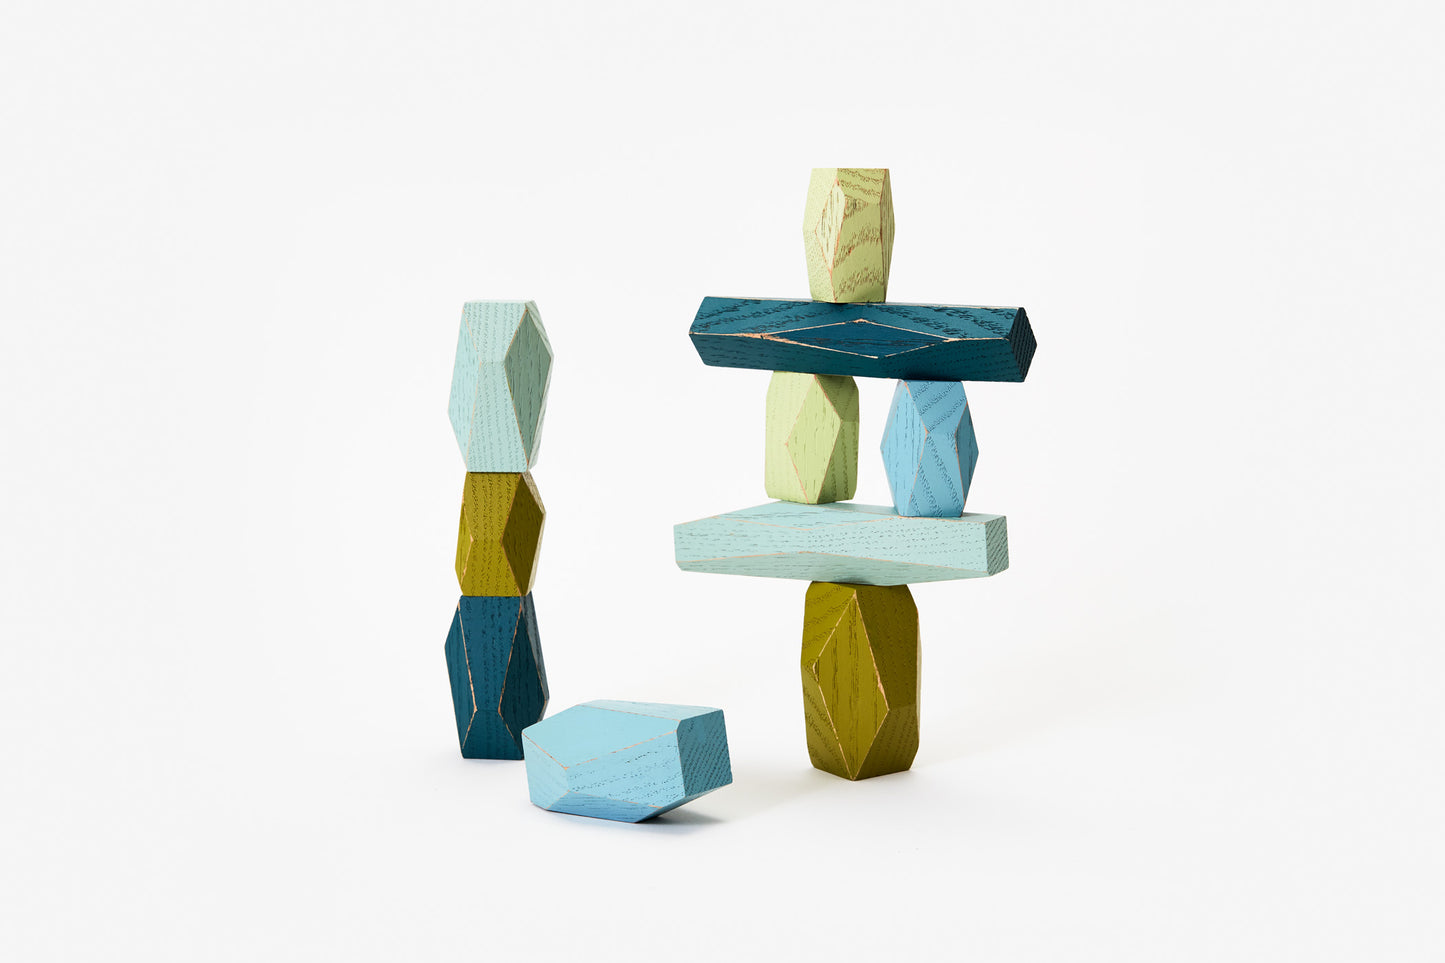 Faceted wooden shapes in various shades of blue and green, balanced on top of each other.